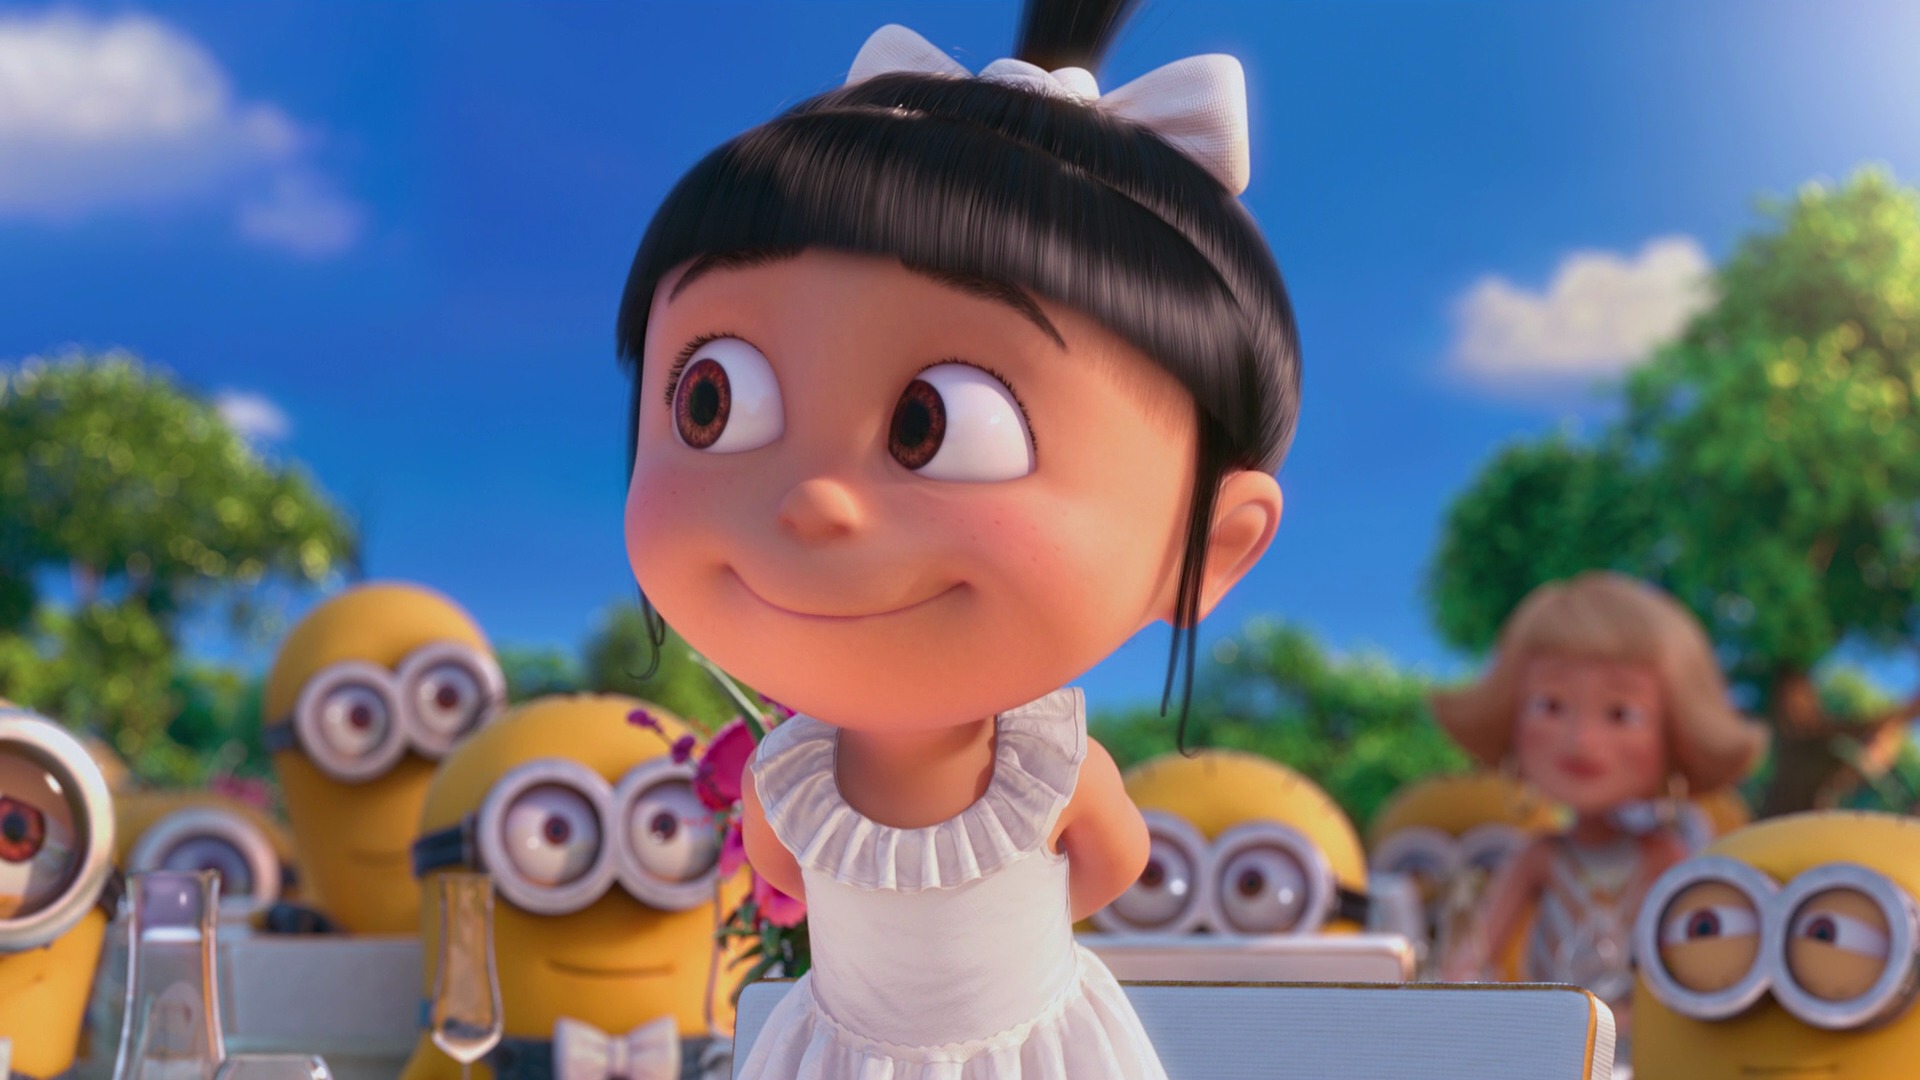 despicable me agnes its so fluffy im gonna die